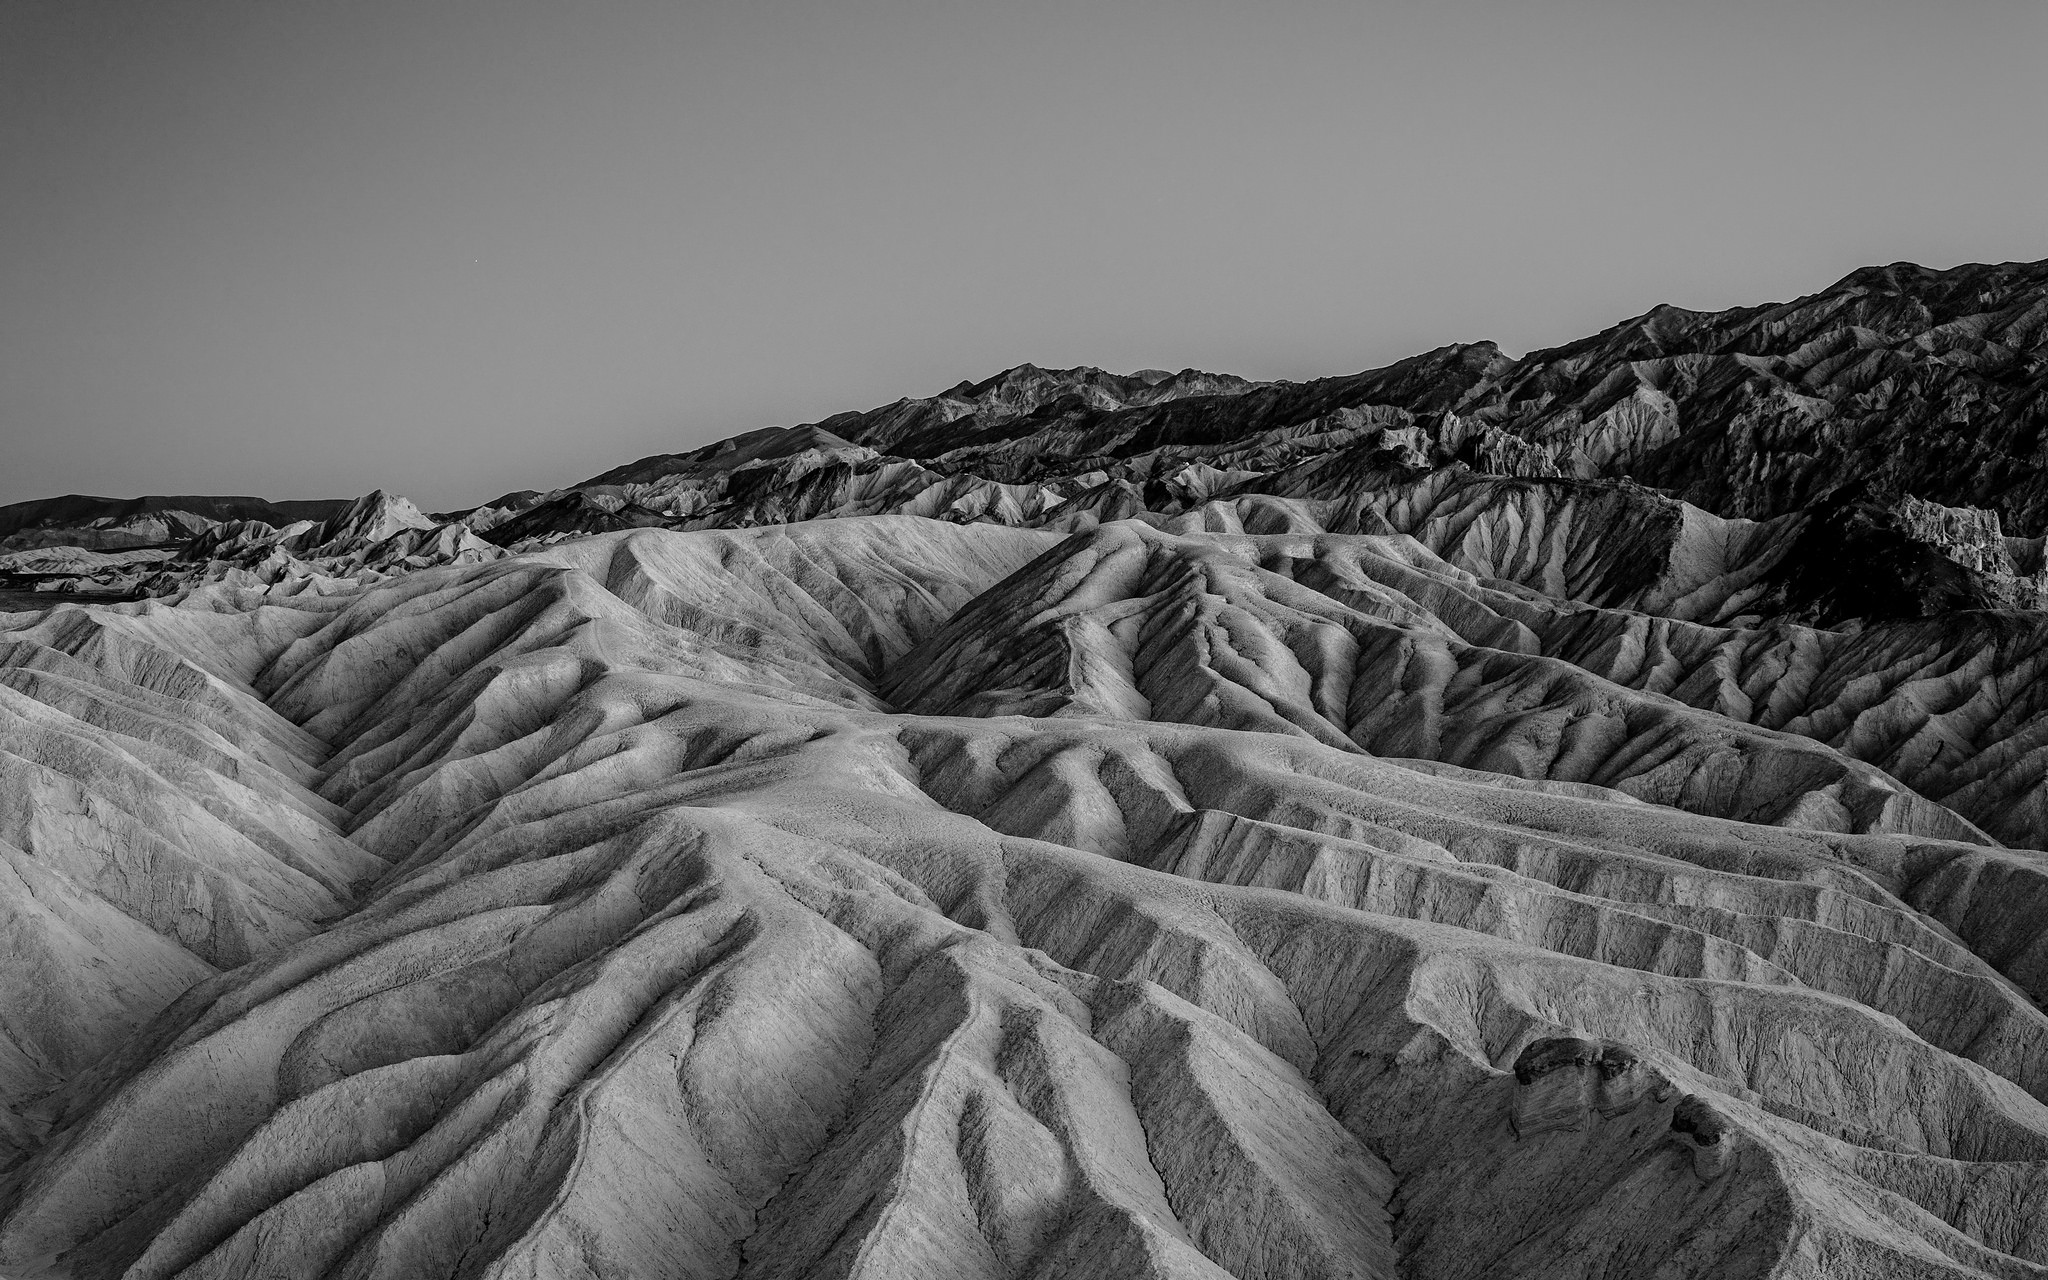 General 2048x1280 mountains landscape nature monochrome clear sky rocks USA California Death Valley